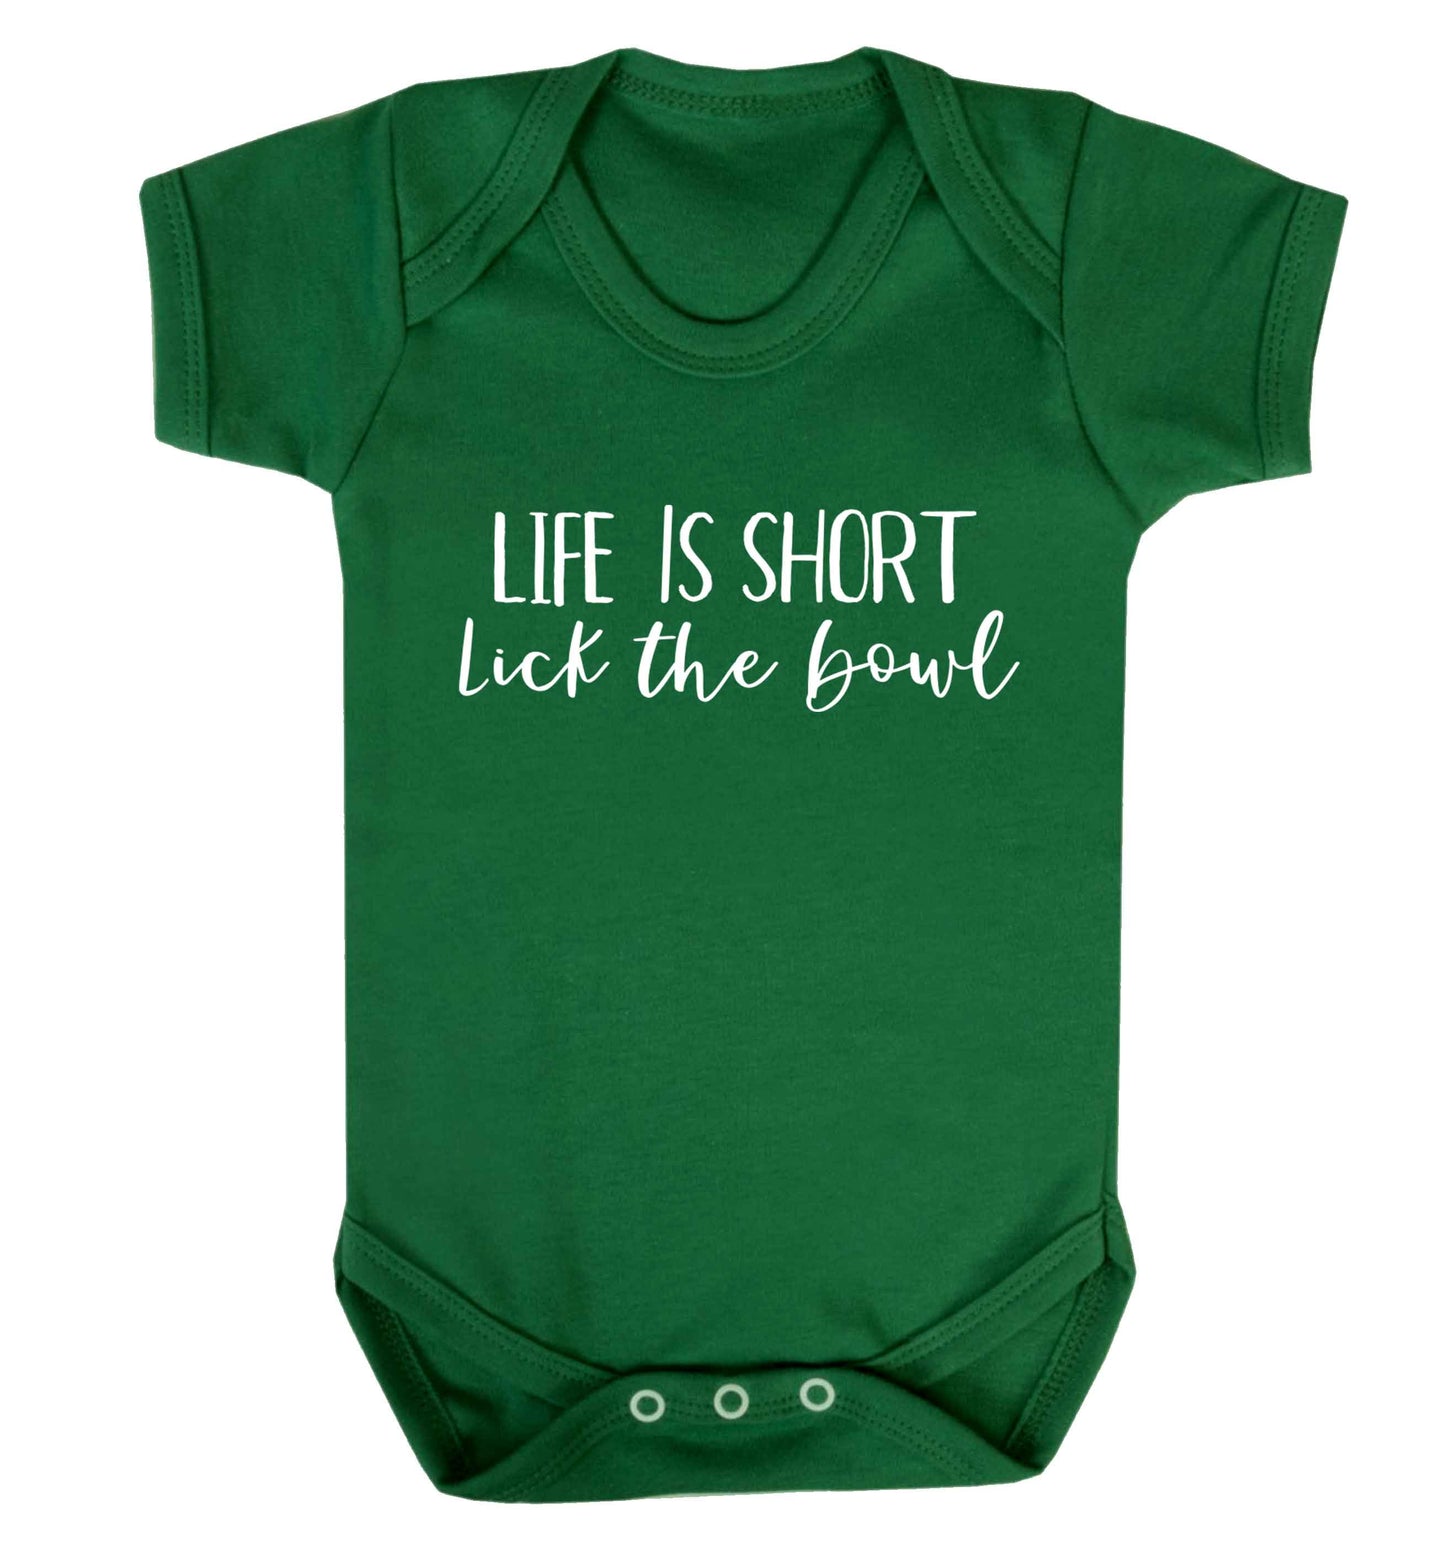 Life is short lick the bowl Baby Vest green 18-24 months